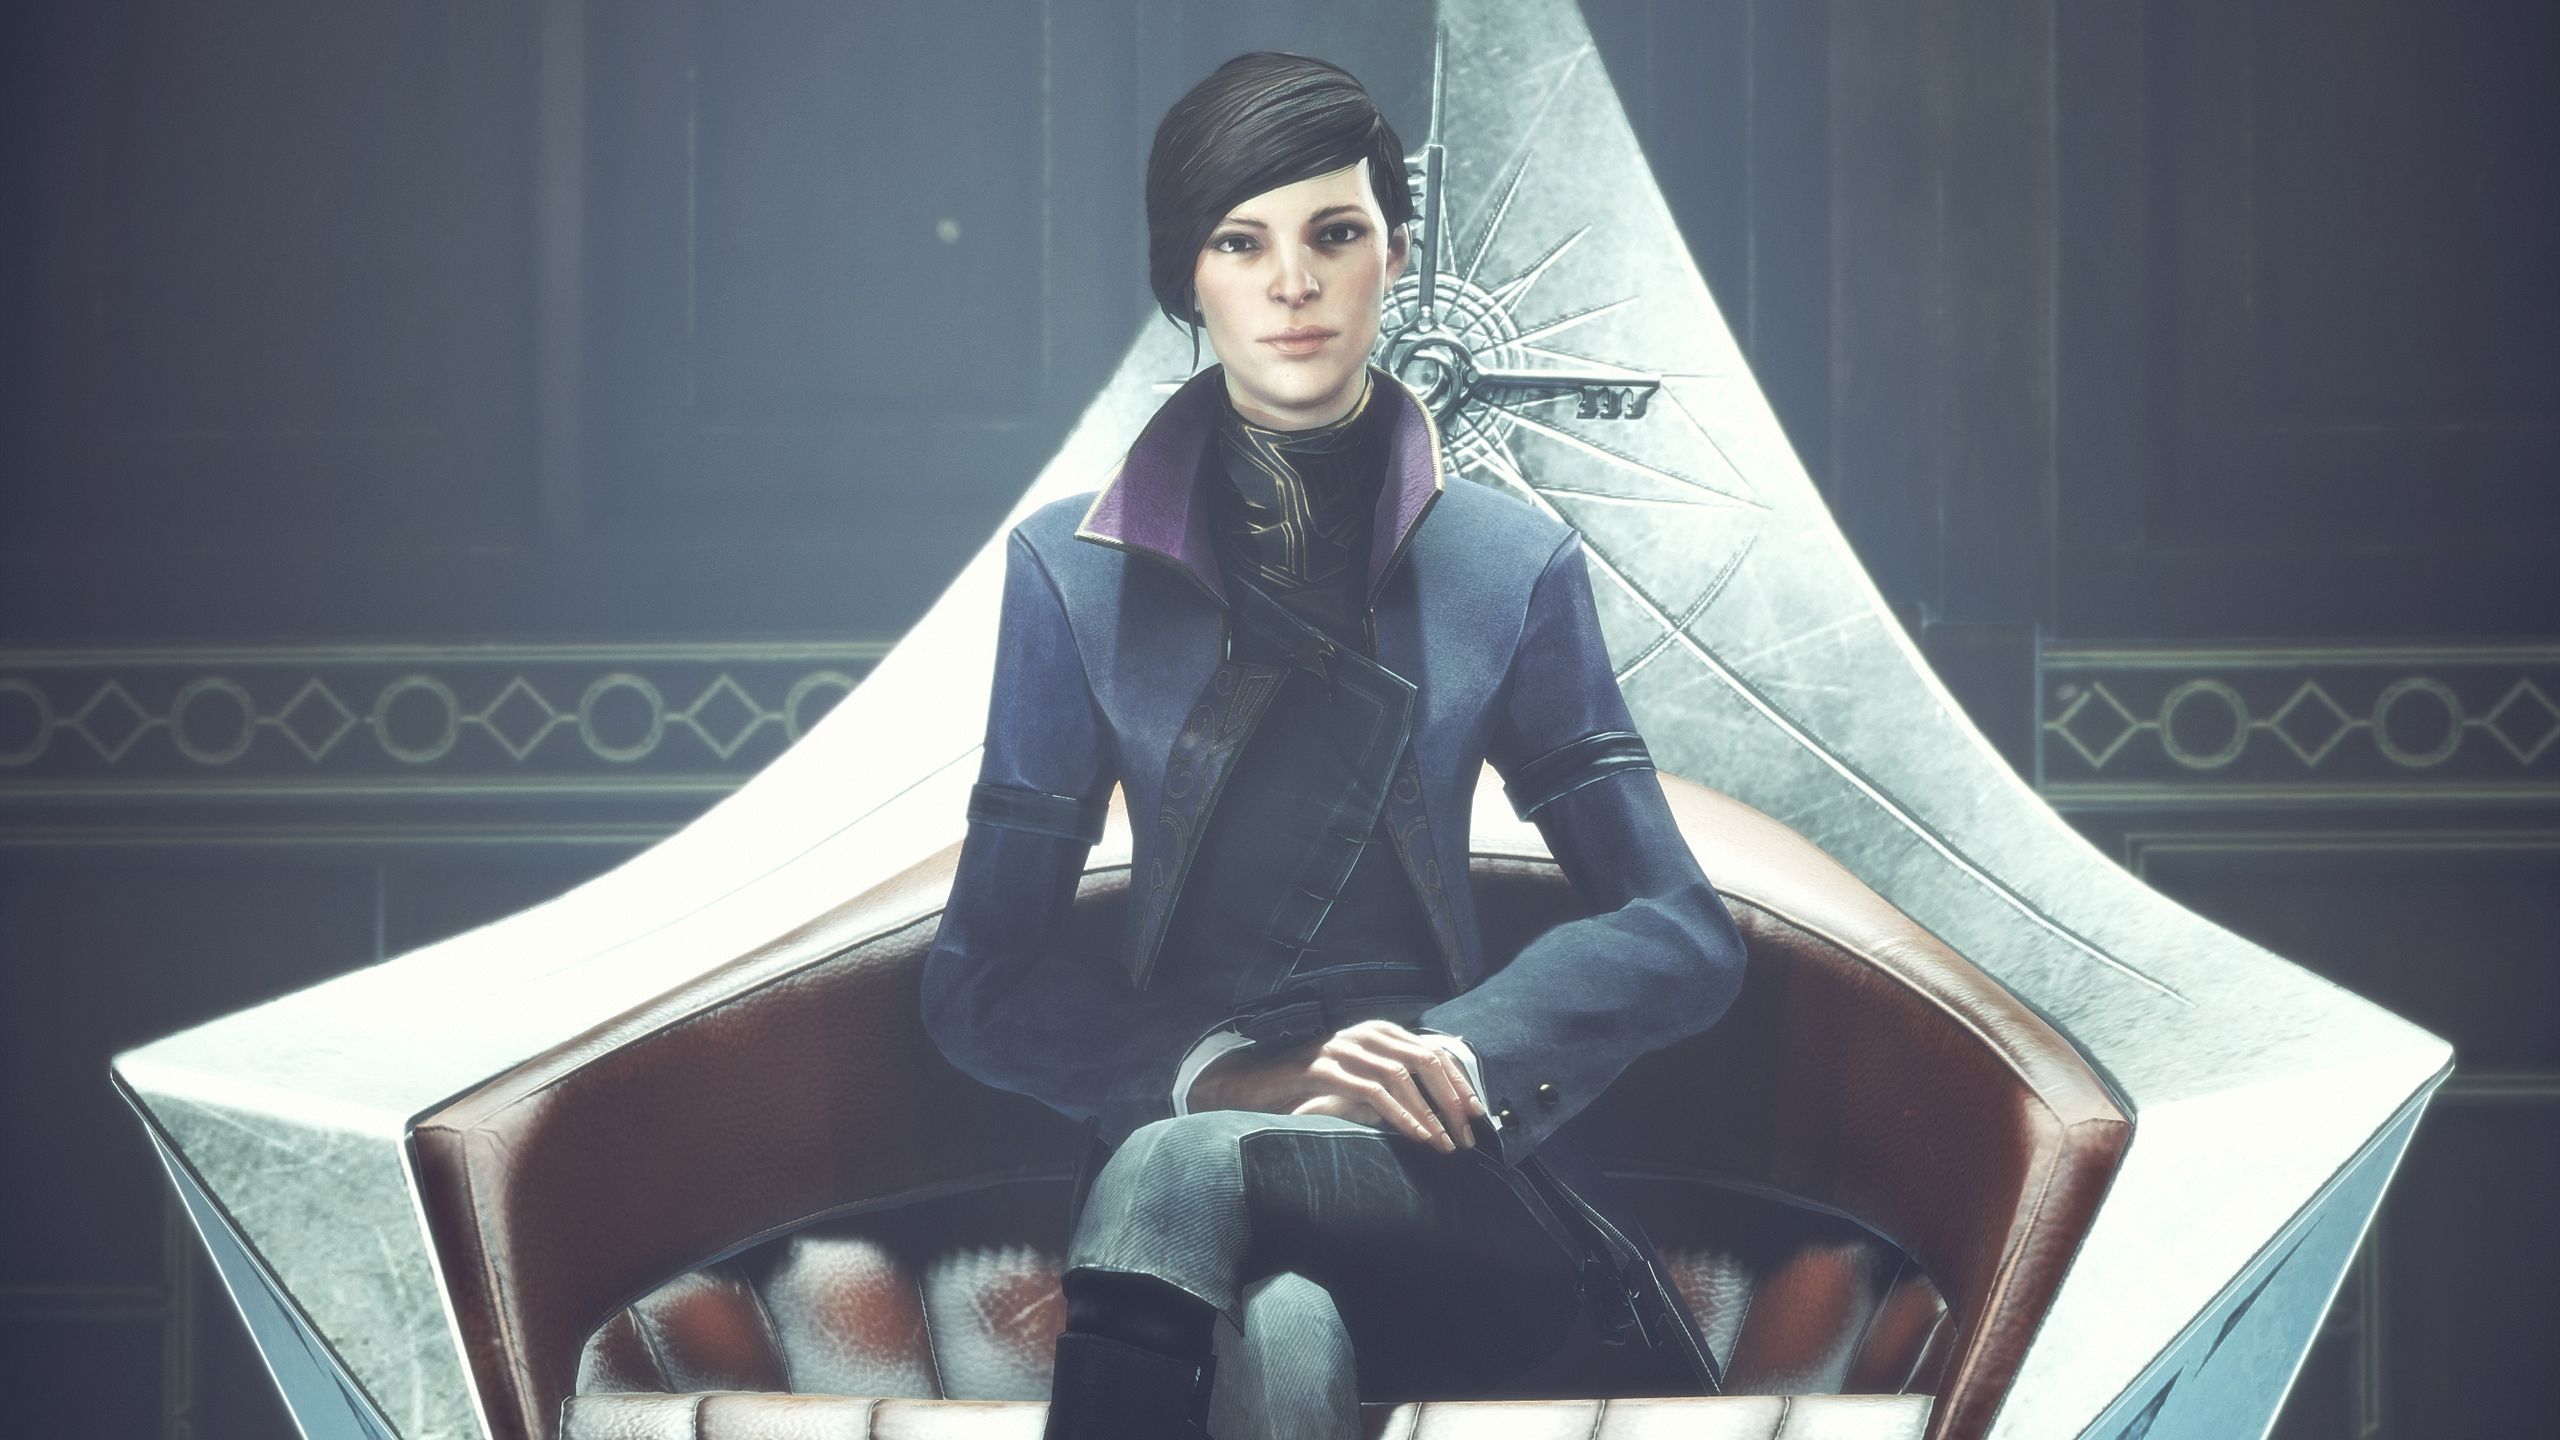 Emily Kaldwin In Dishonored 2 1440P Resolution HD 4k Wallpaper, Image, Background, Photo and Picture